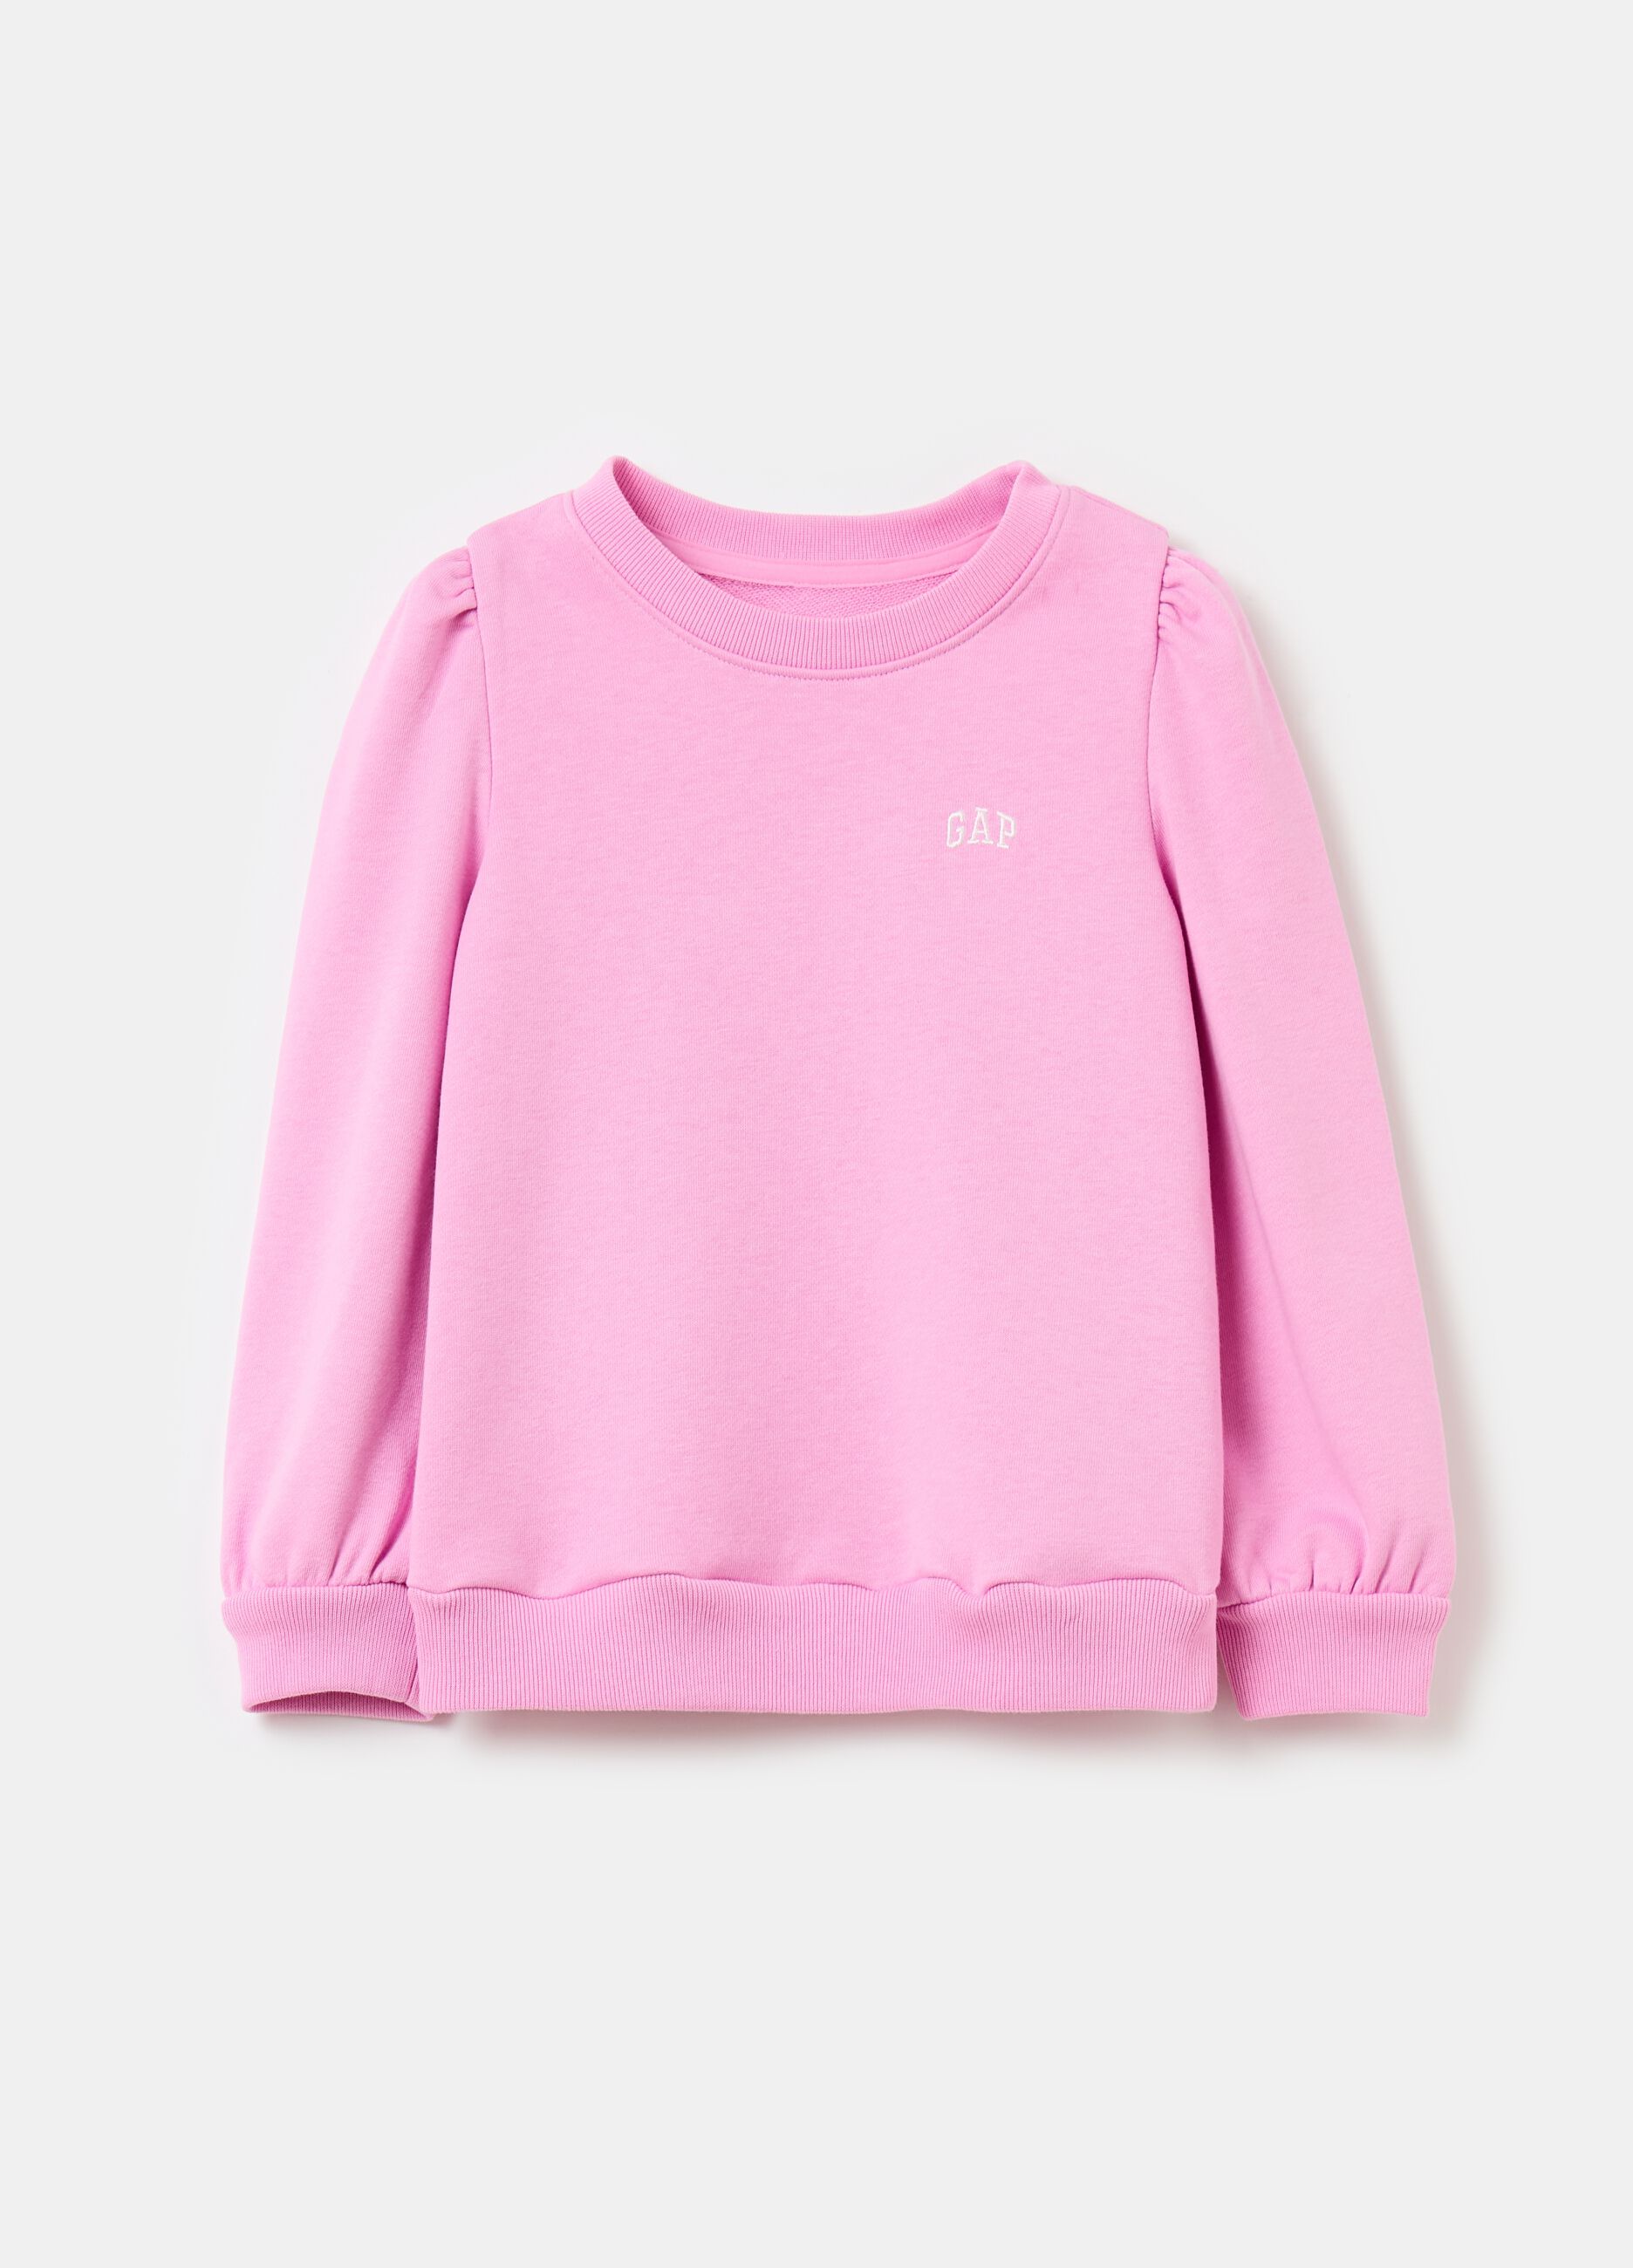 Sweatshirt with logo embroidery and puff sleeves